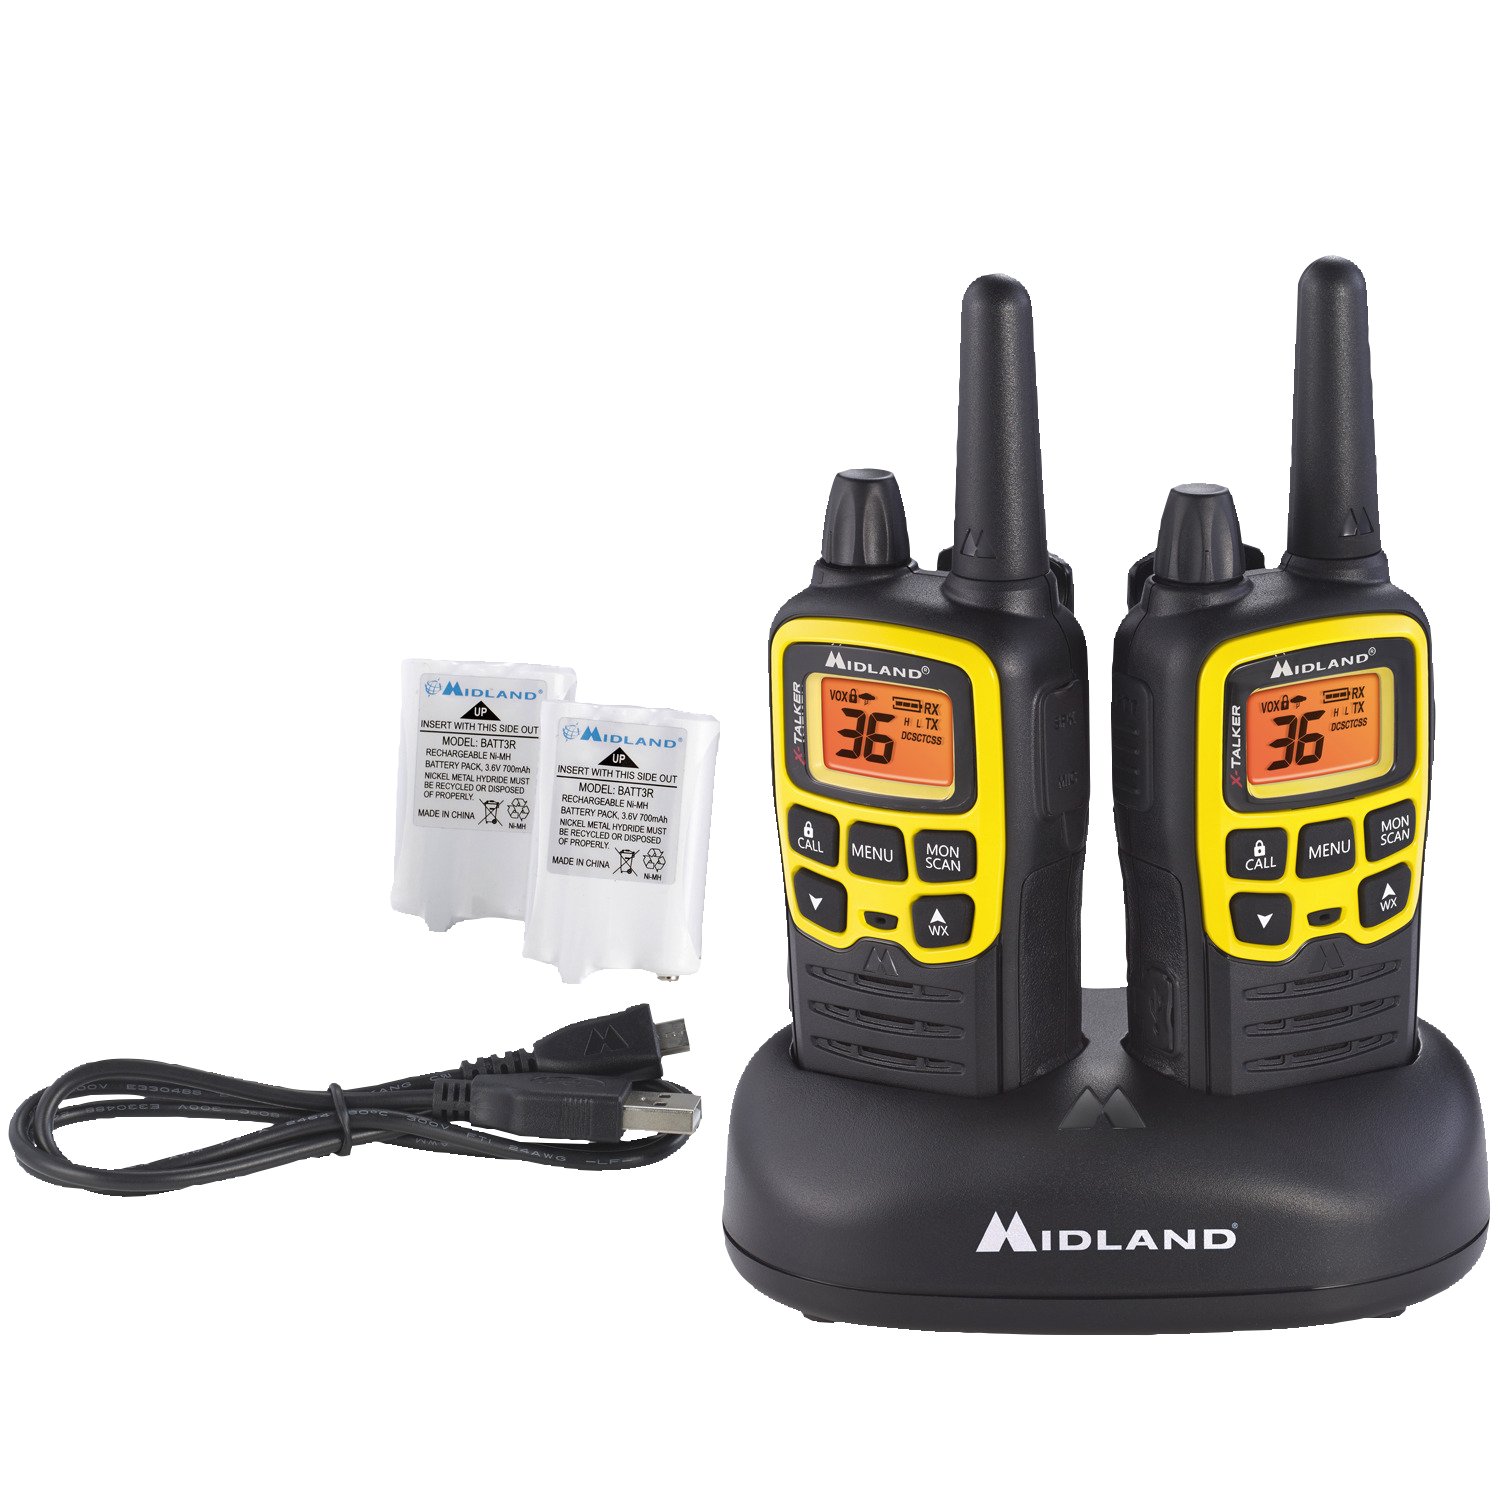 Midland T61VP3 36 Channel FRS Two-Way Radio Up to 32 Mile Range Walkie Talkie Yellow Black (Pack of 12) - 2